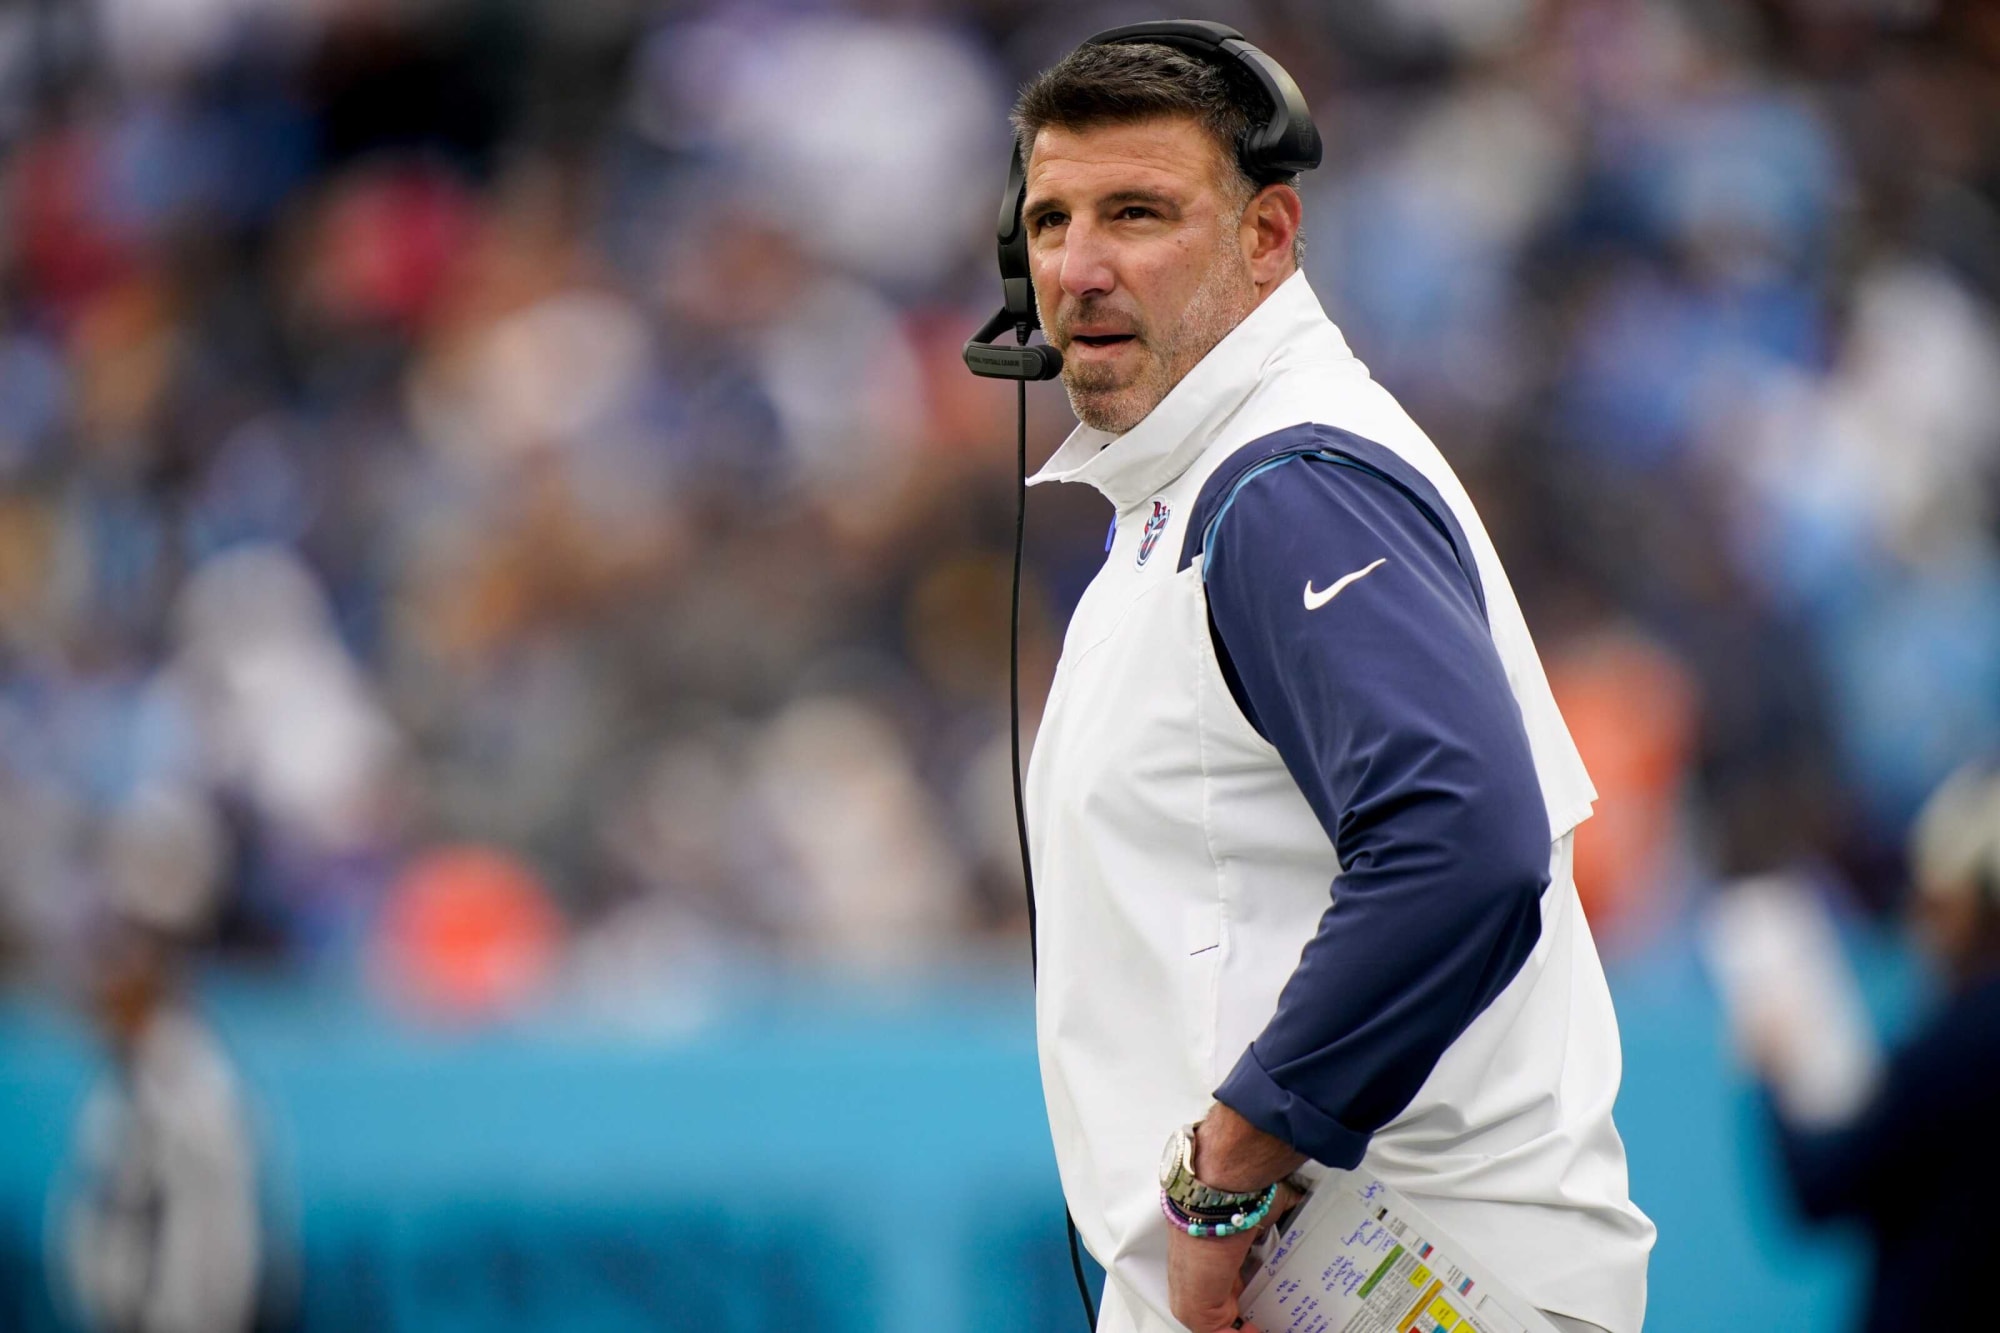 Could Ohio State Football make a kitchen sink offer to Mike Vrabel?